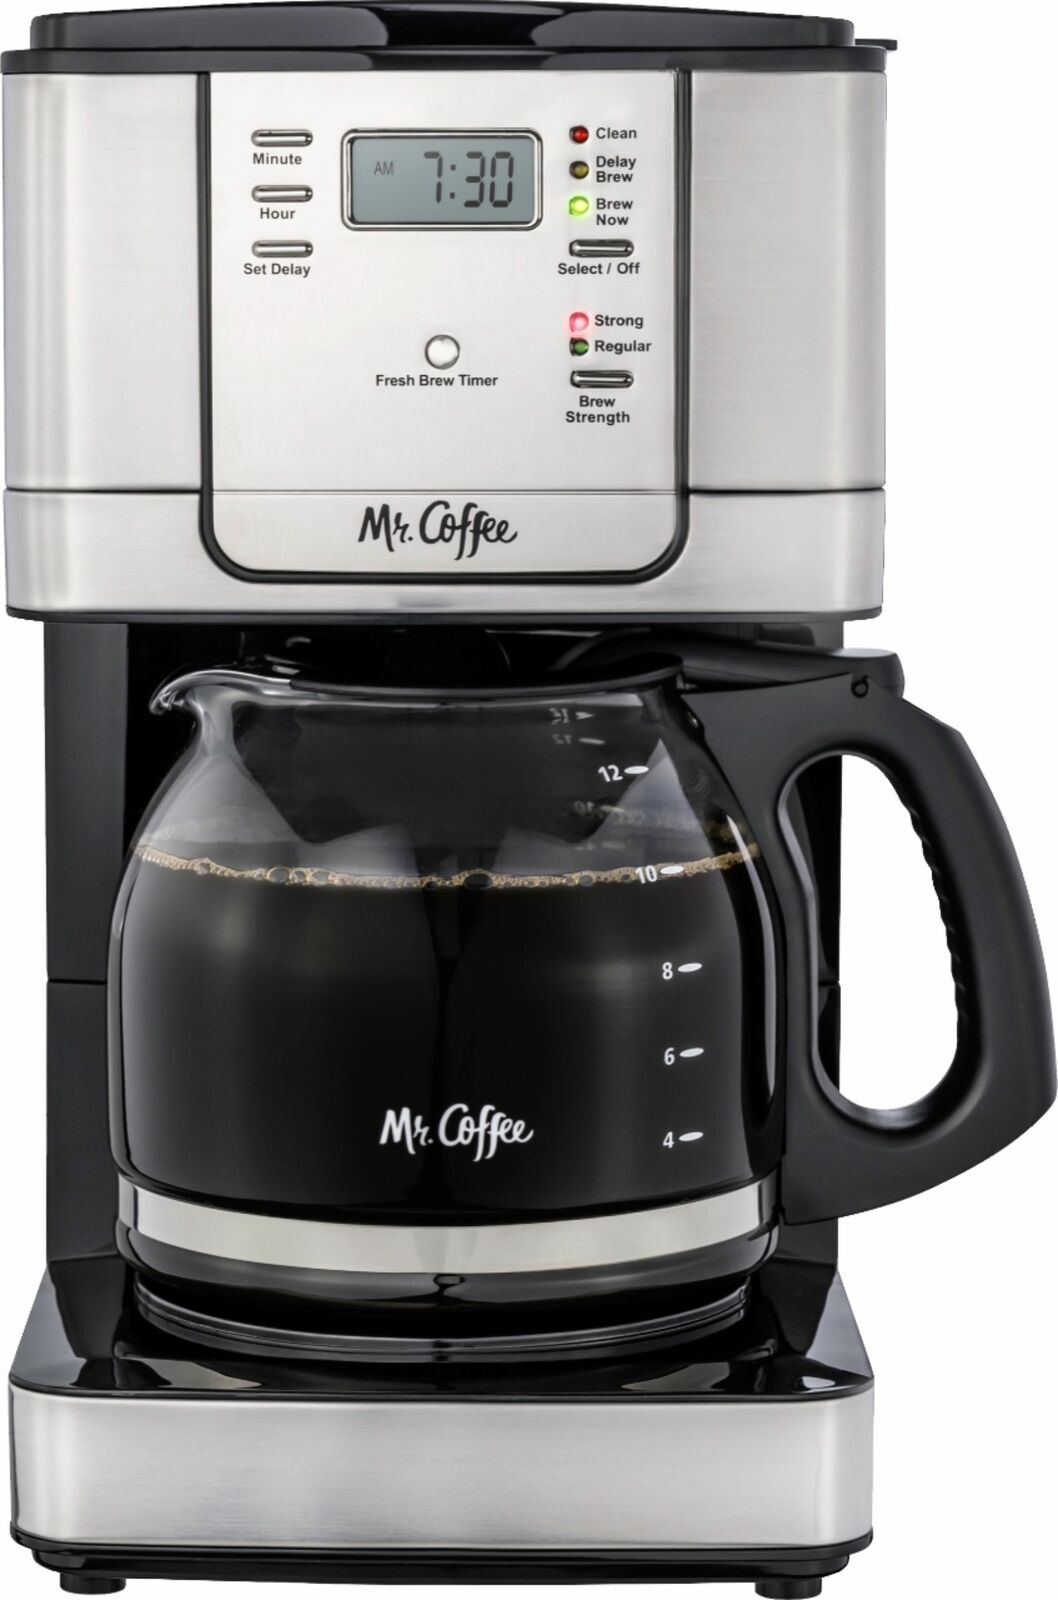 20 Mr. Coffee - 20-Cup Coffee Maker with Strong Brew Selector